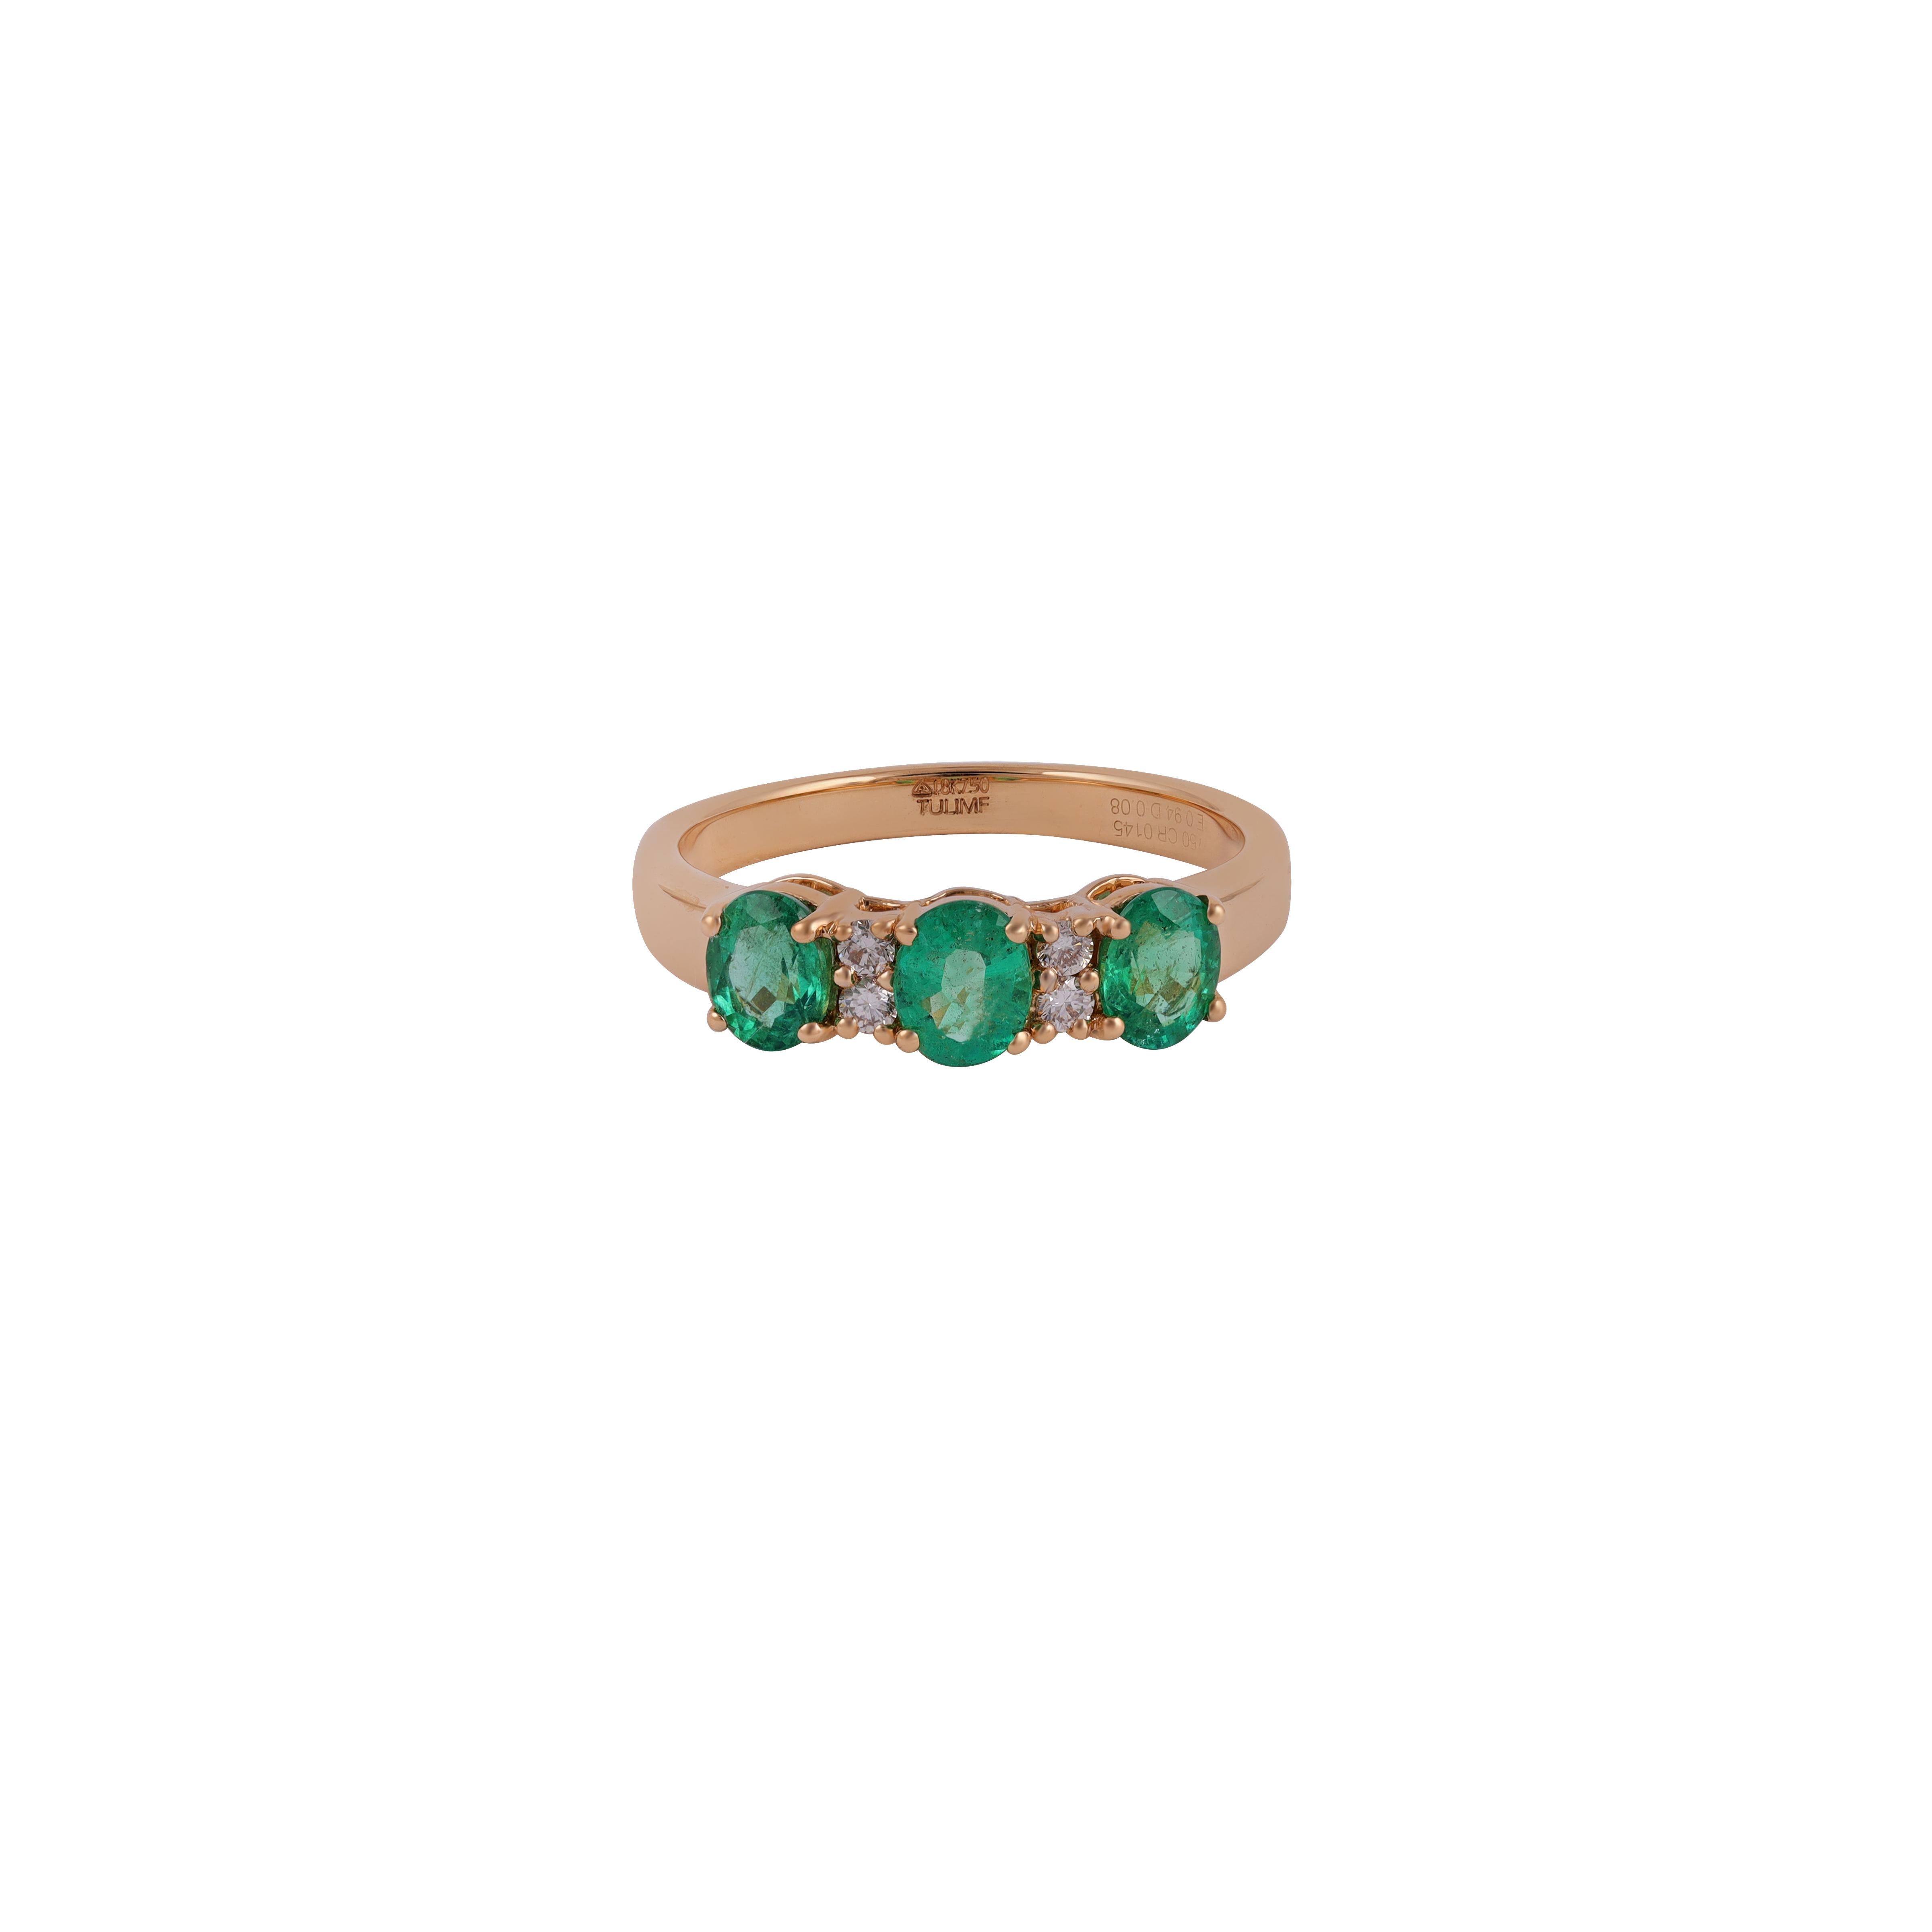 New Inspired Magnificent Emerald 3-Stone Ring 18 Karat Gold
The 3 Fine emeralds show excellent clarity, and excellent color, weighing Emerald  0.94 carats total, Diamonds 0.08 Carat & Gold 3.29 gm. The yellow gold Half band and setting add warmth